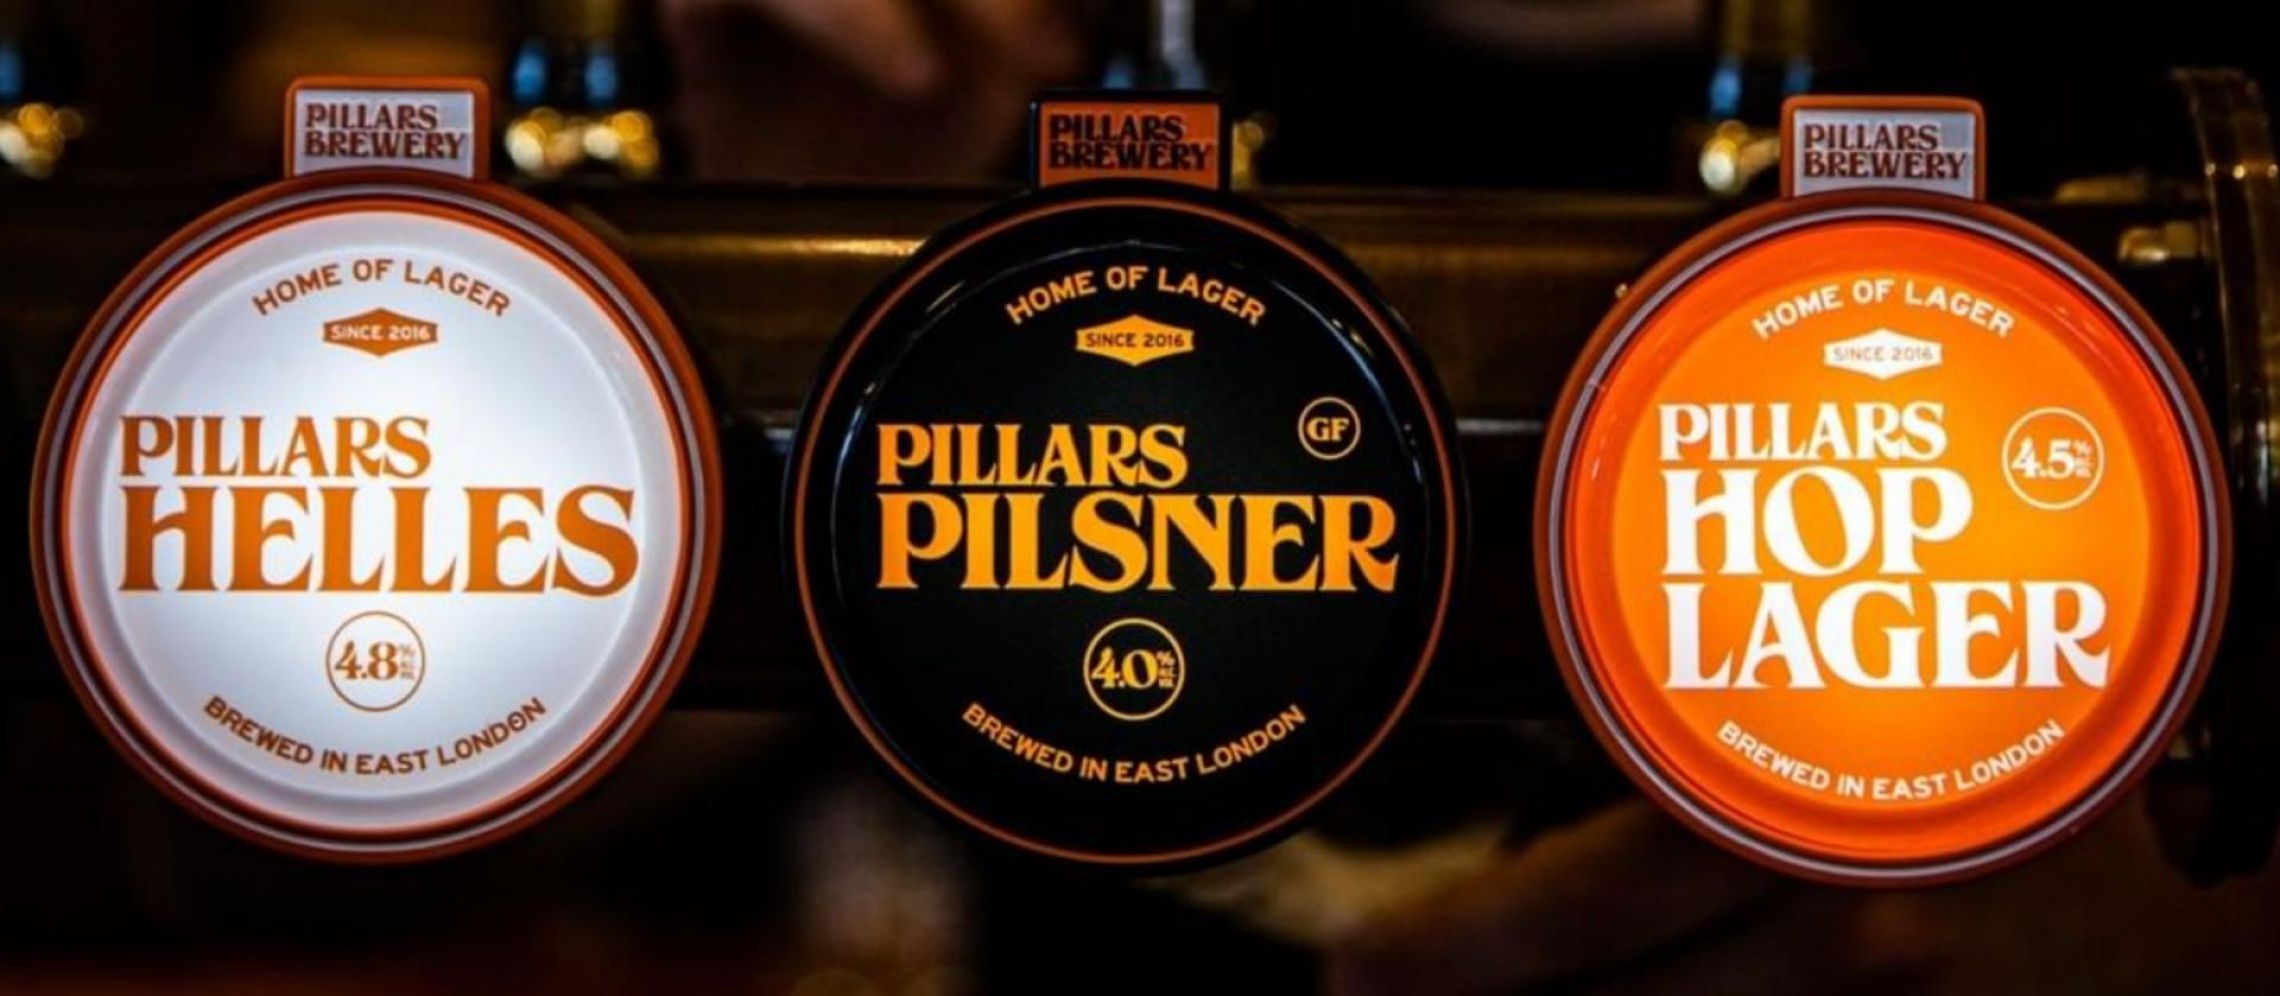 Photo for: Pillars is more than just an East London Brewery - its a community